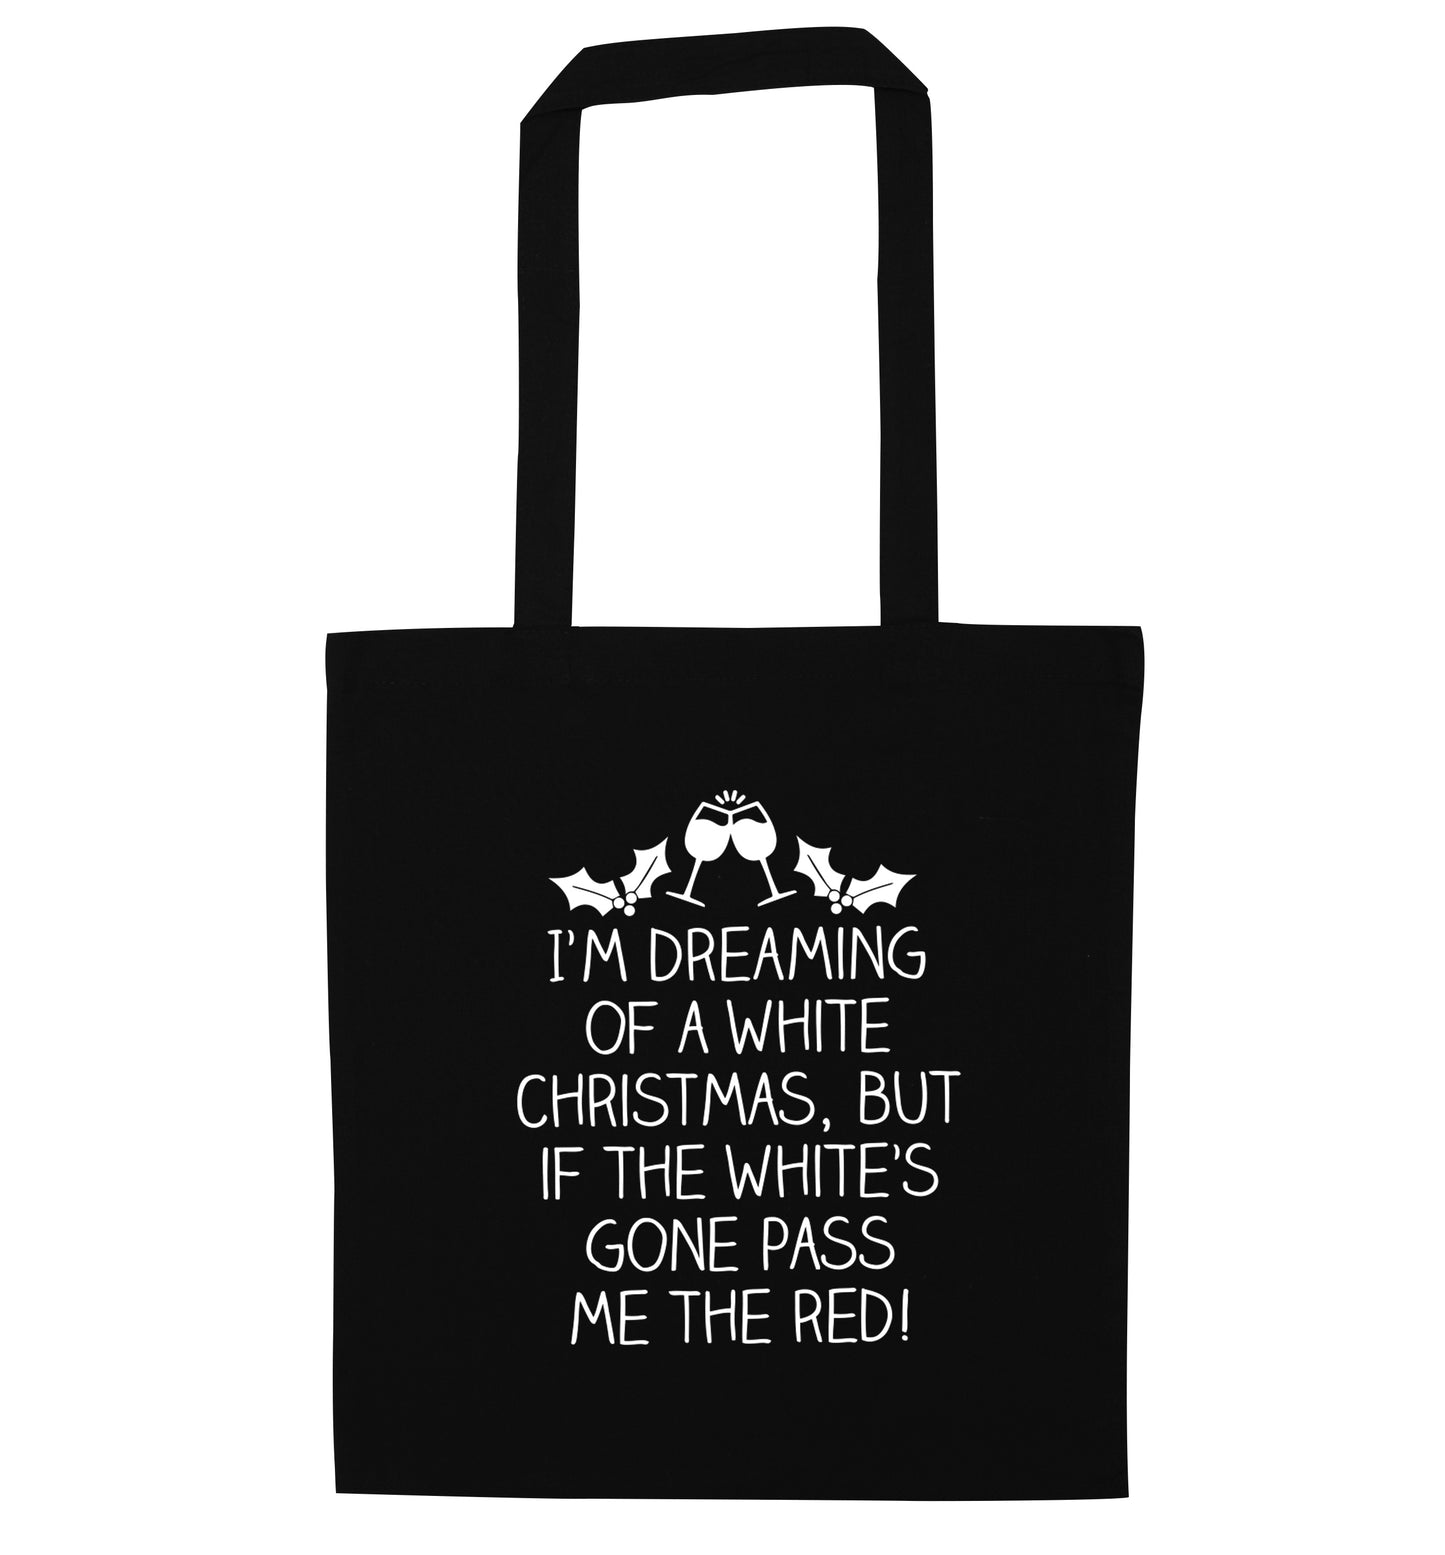 I'm dreaming of a white christmas, but if the white's gone pass me the red! black tote bag